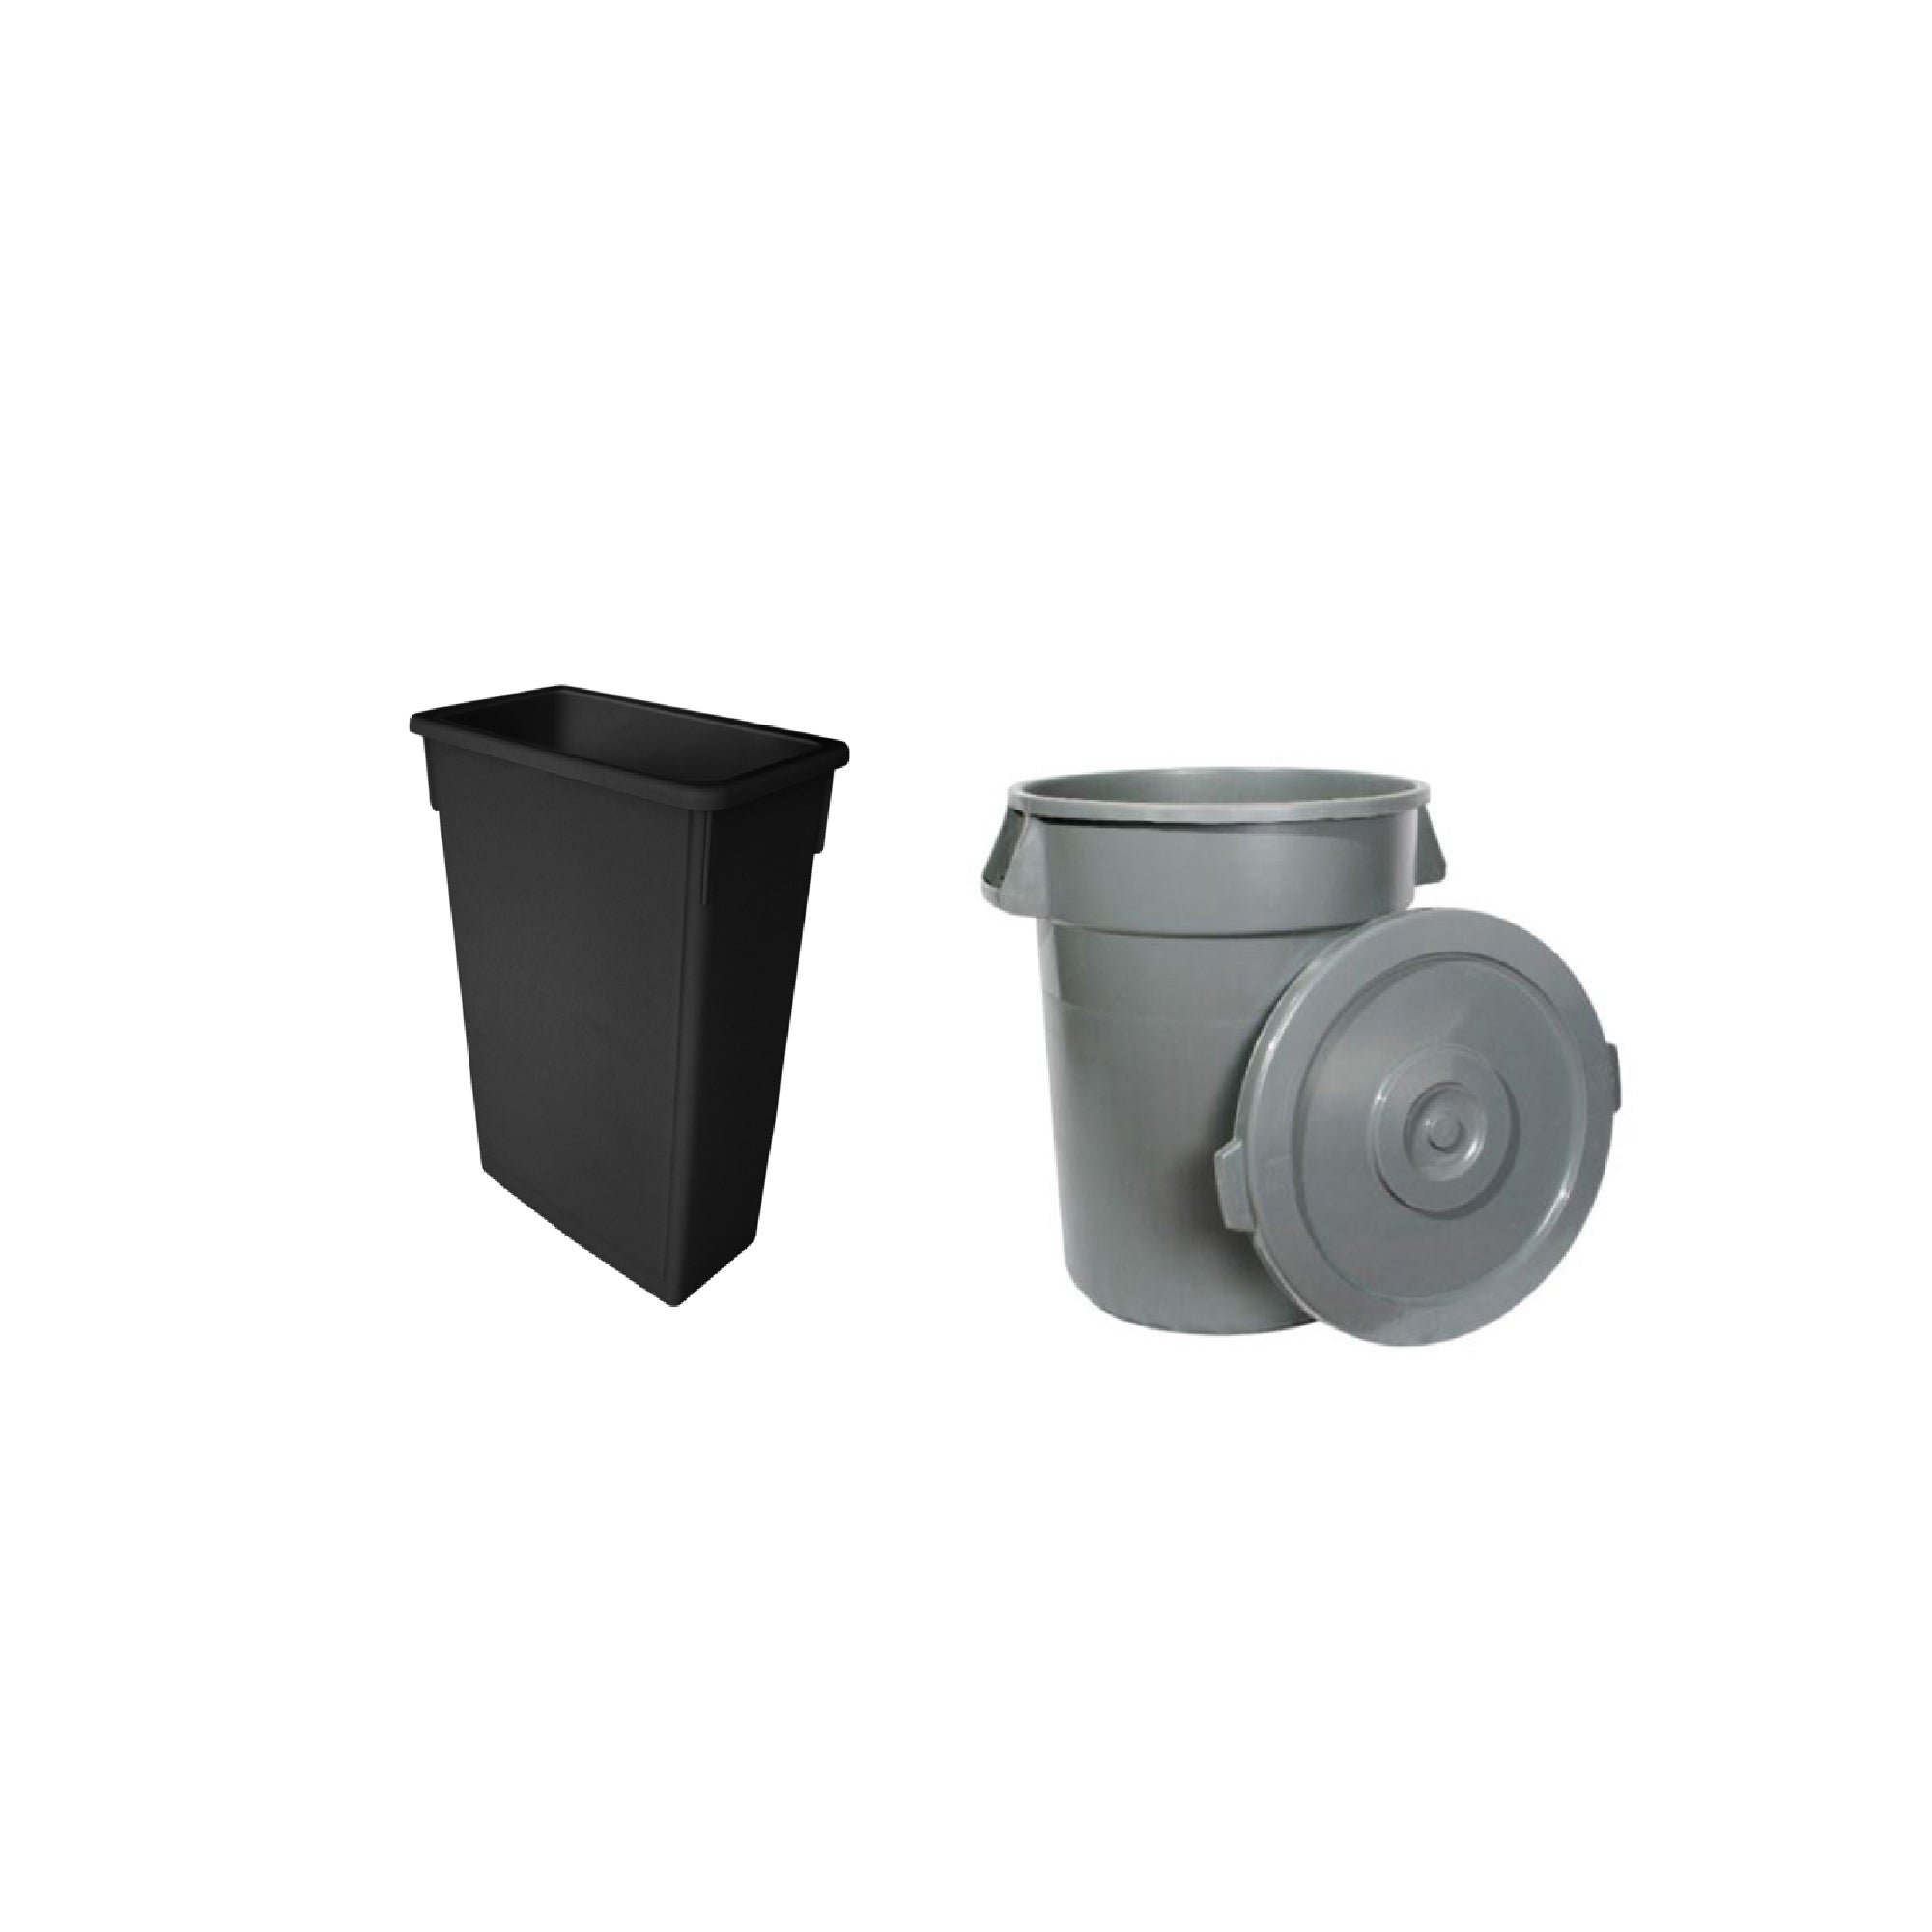 Winco® Lid For 44 Gal. Heavy Duty Large Grey Trash Can